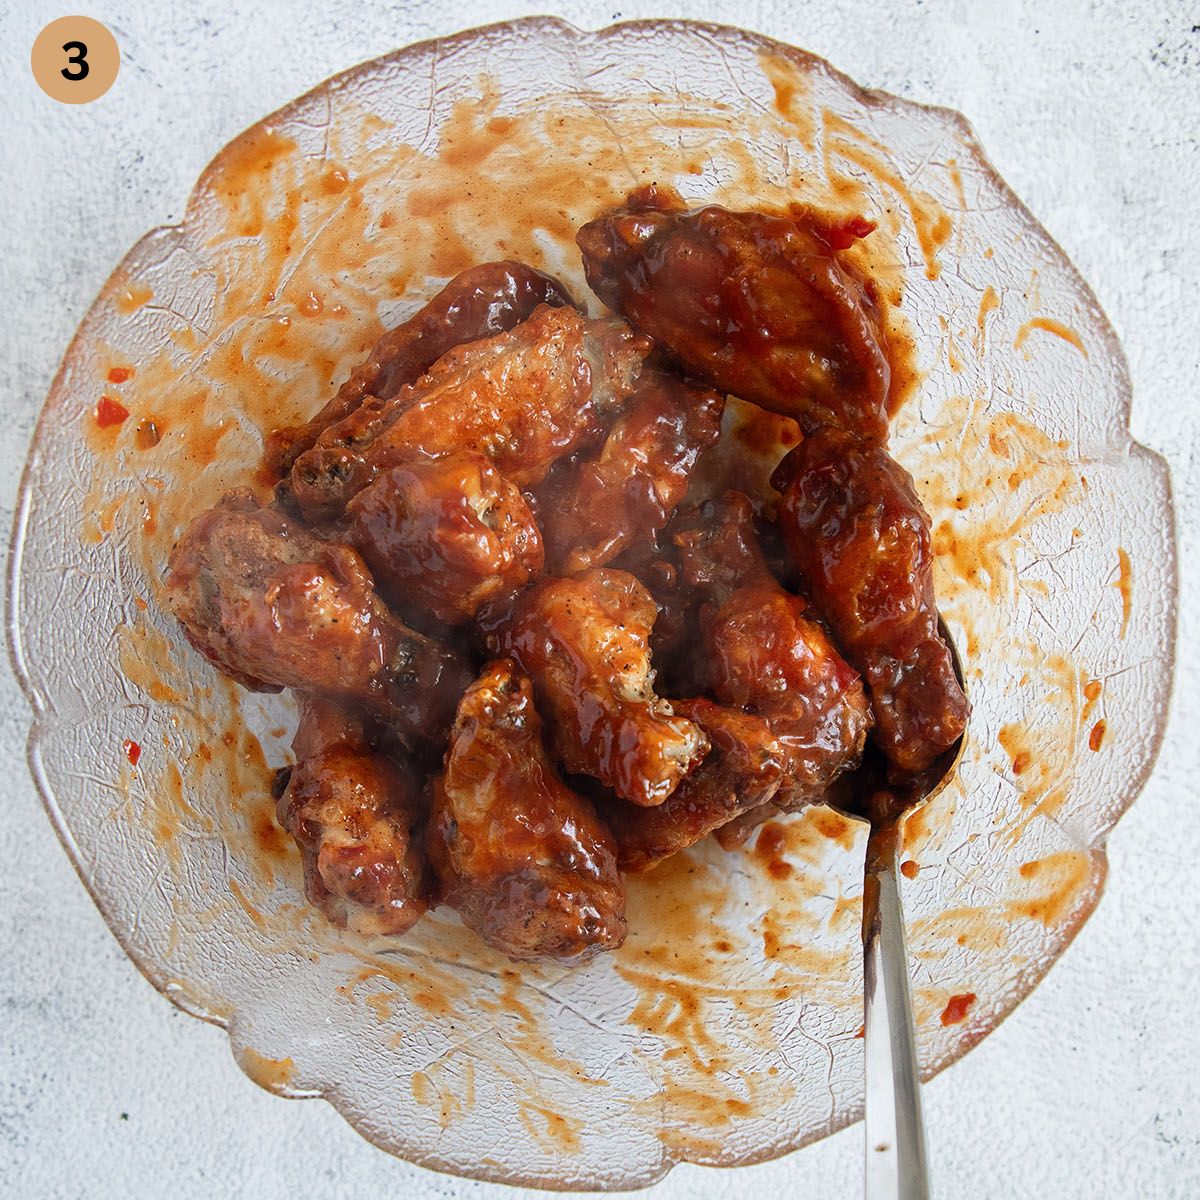 tossing wings with bbq sauce in a bowl with a spoon.